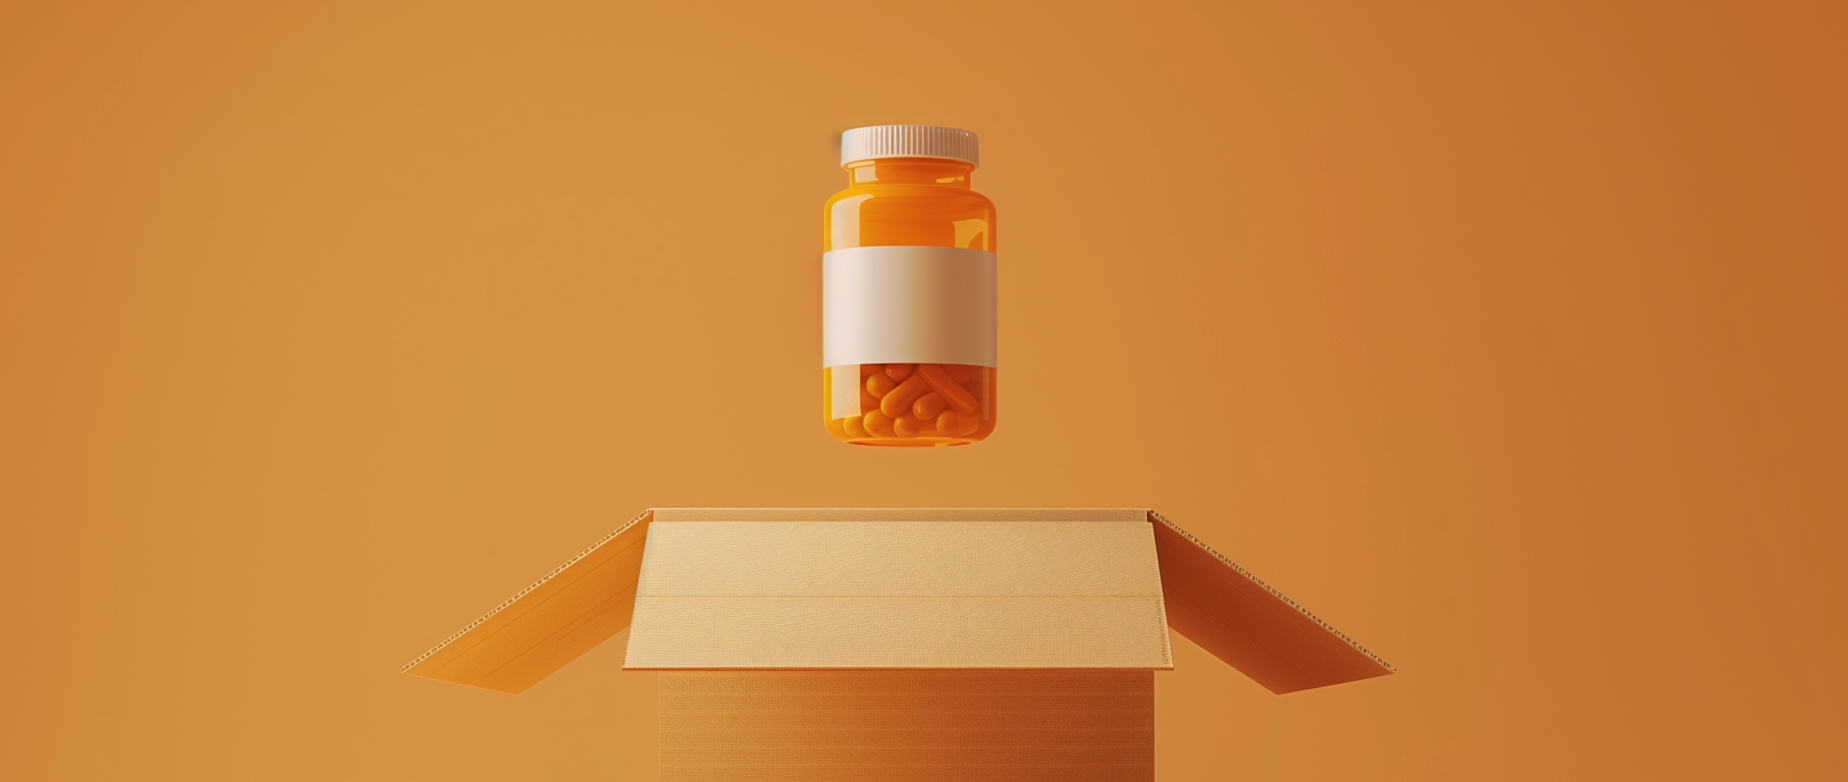 A pill bottle suspended over a shipping box on an orange background.